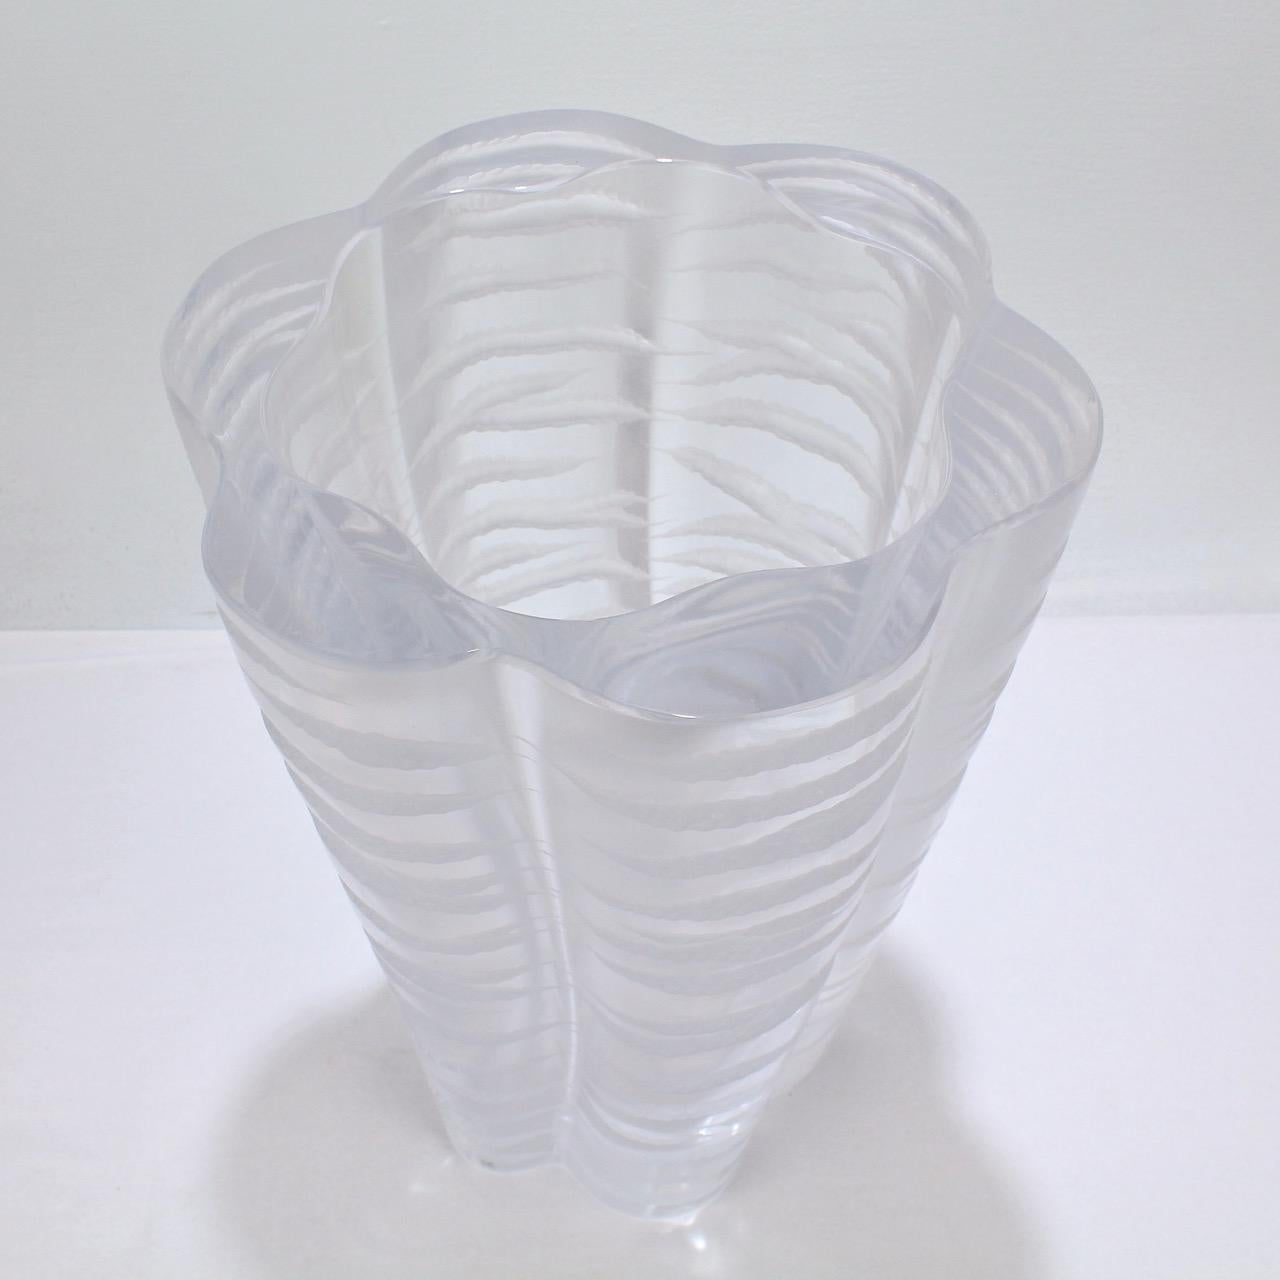 Senlis, a Mid-Century Modern French Art Glass Vase by Marc Lalique for Lalique 1